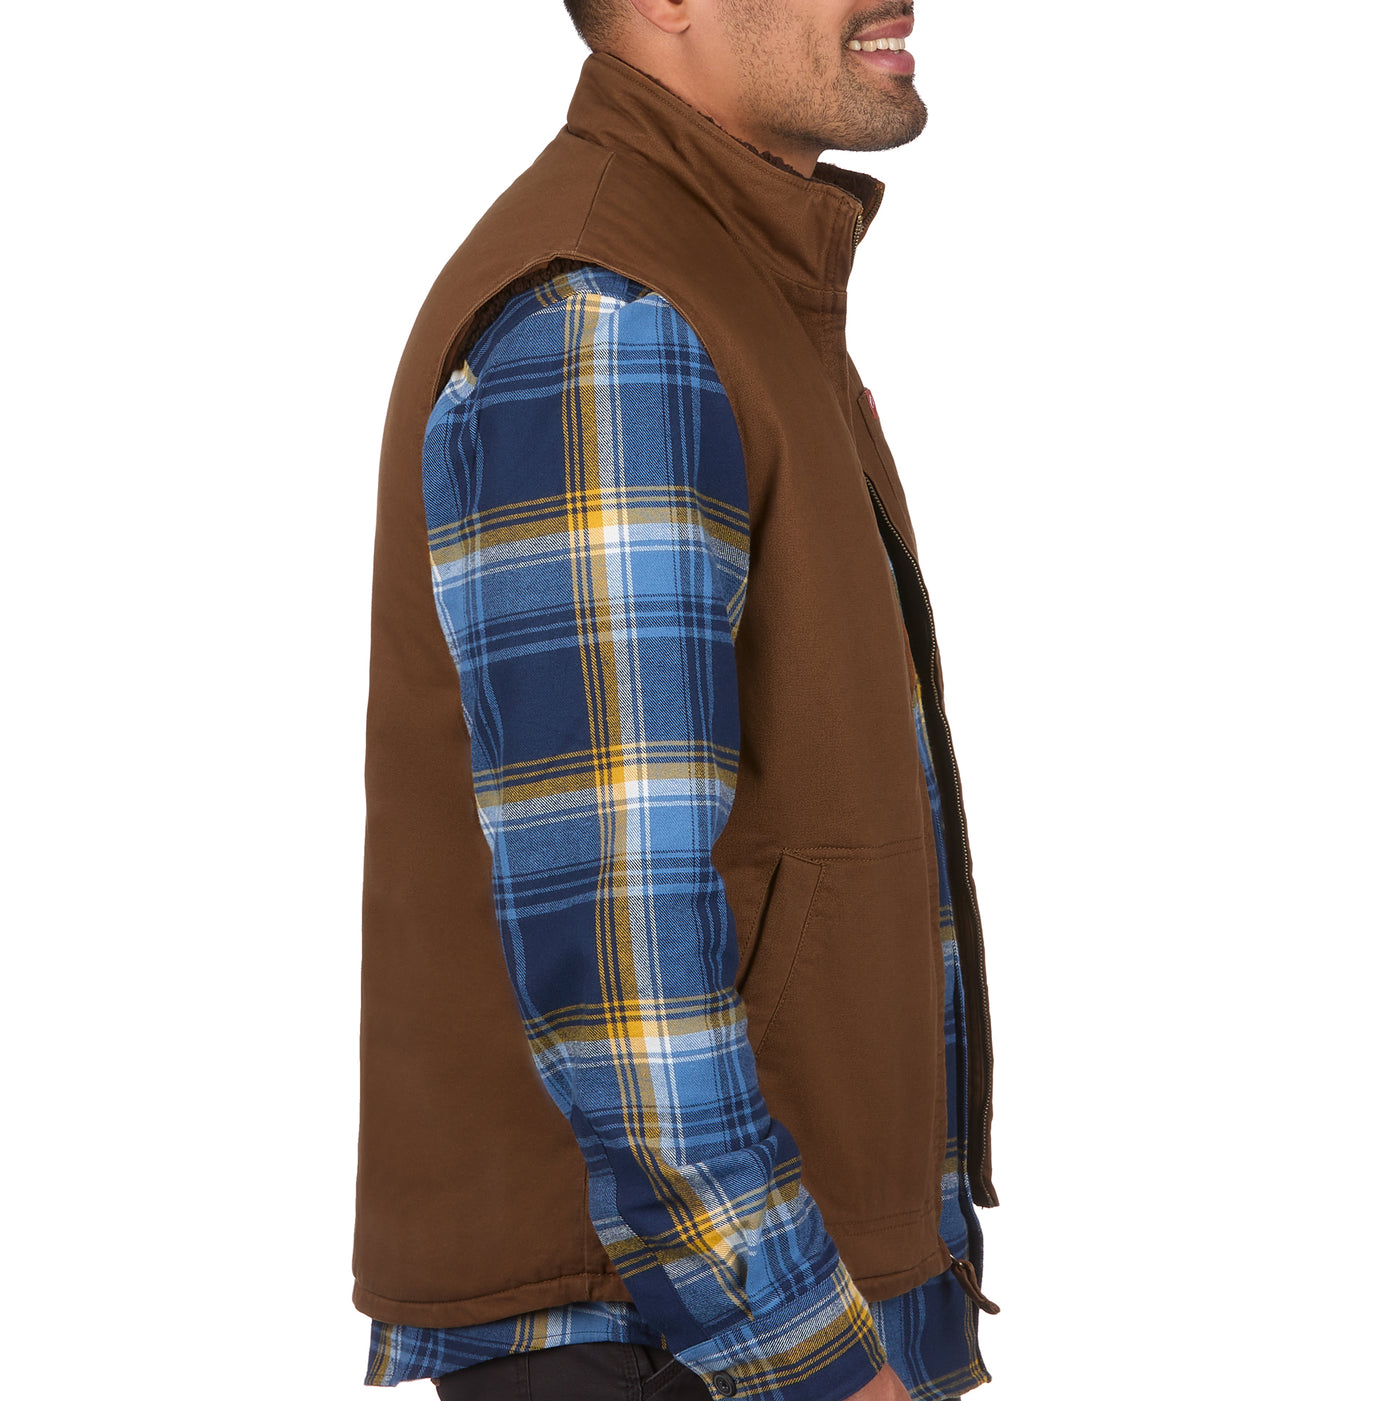 American outdoorsman Solid Sherpa Lined Twill Vest #color_copper